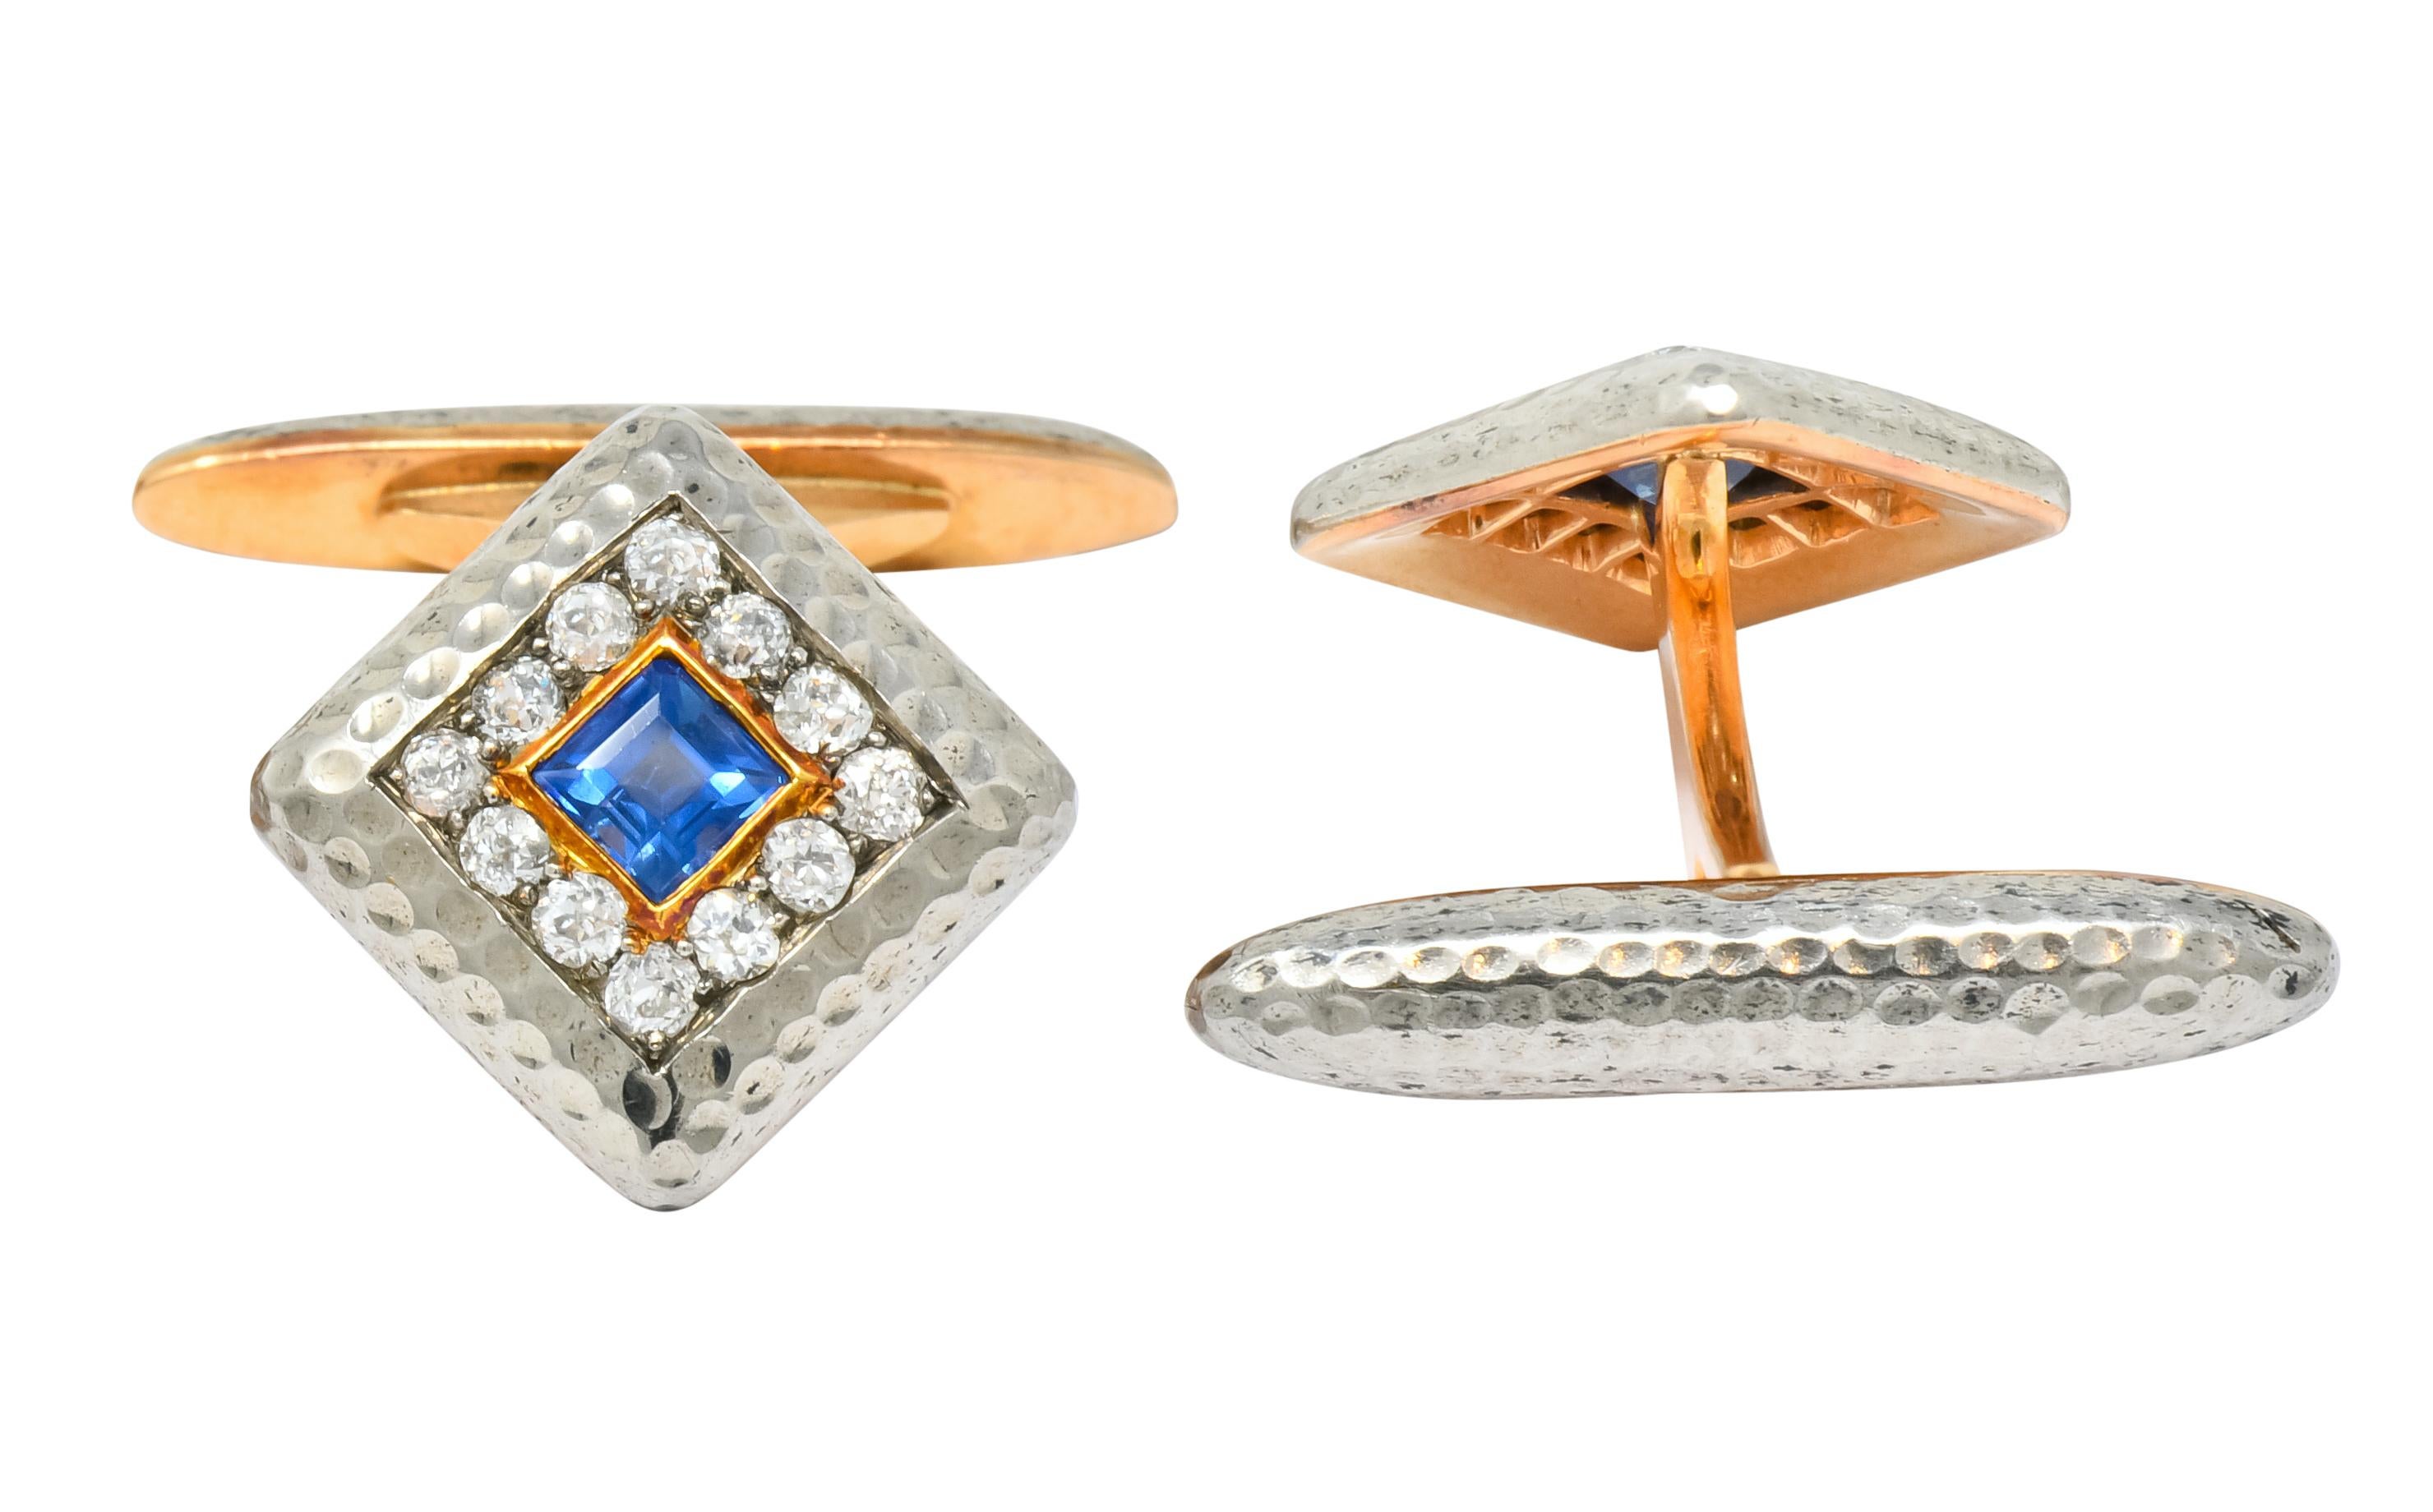 Lever style cufflinks featuring a two-tone navette design with hammered detail

Each centers a square cut sapphire weighing approximately 0.70 carat total, bright cornflower blue in color

Surrounded by bead set old European cut diamonds, weighing